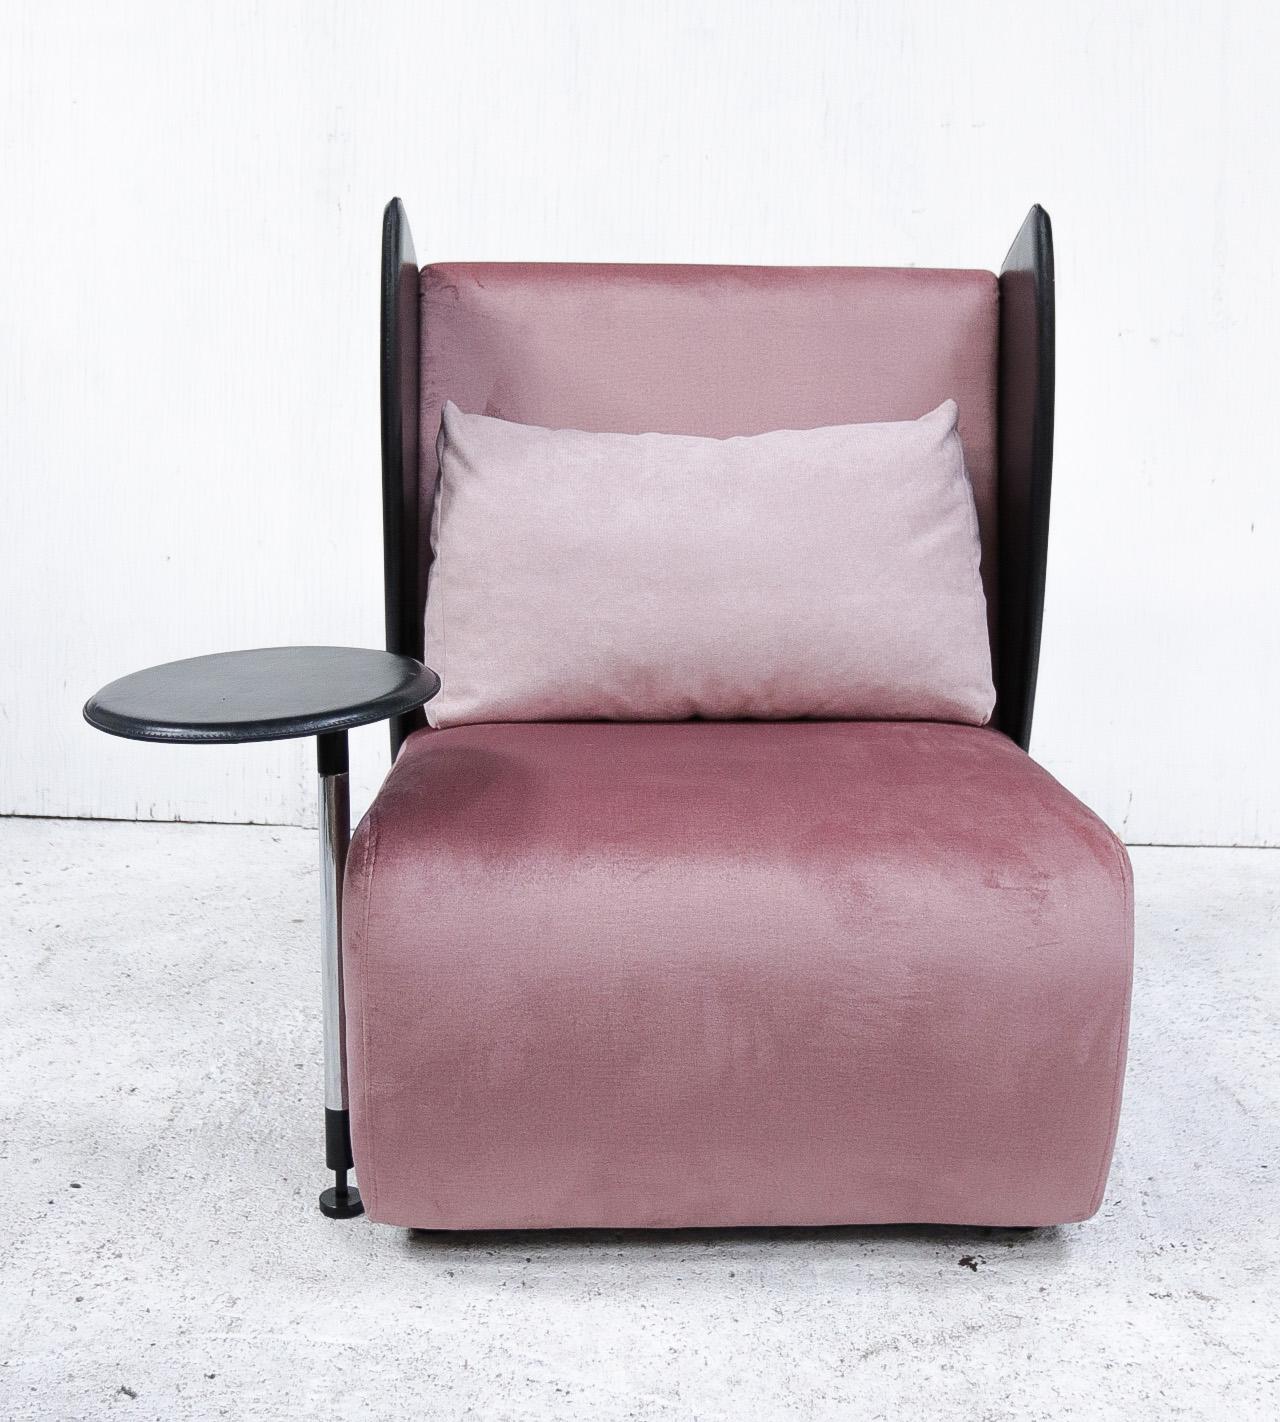 Rare Post-modern Memphis style chair designed by Augusto Mandelli and Walter Selva for Salmistraro, Italy in the 1980s.
The black parts are made of leather.
New old rose velvet upholstery.
 